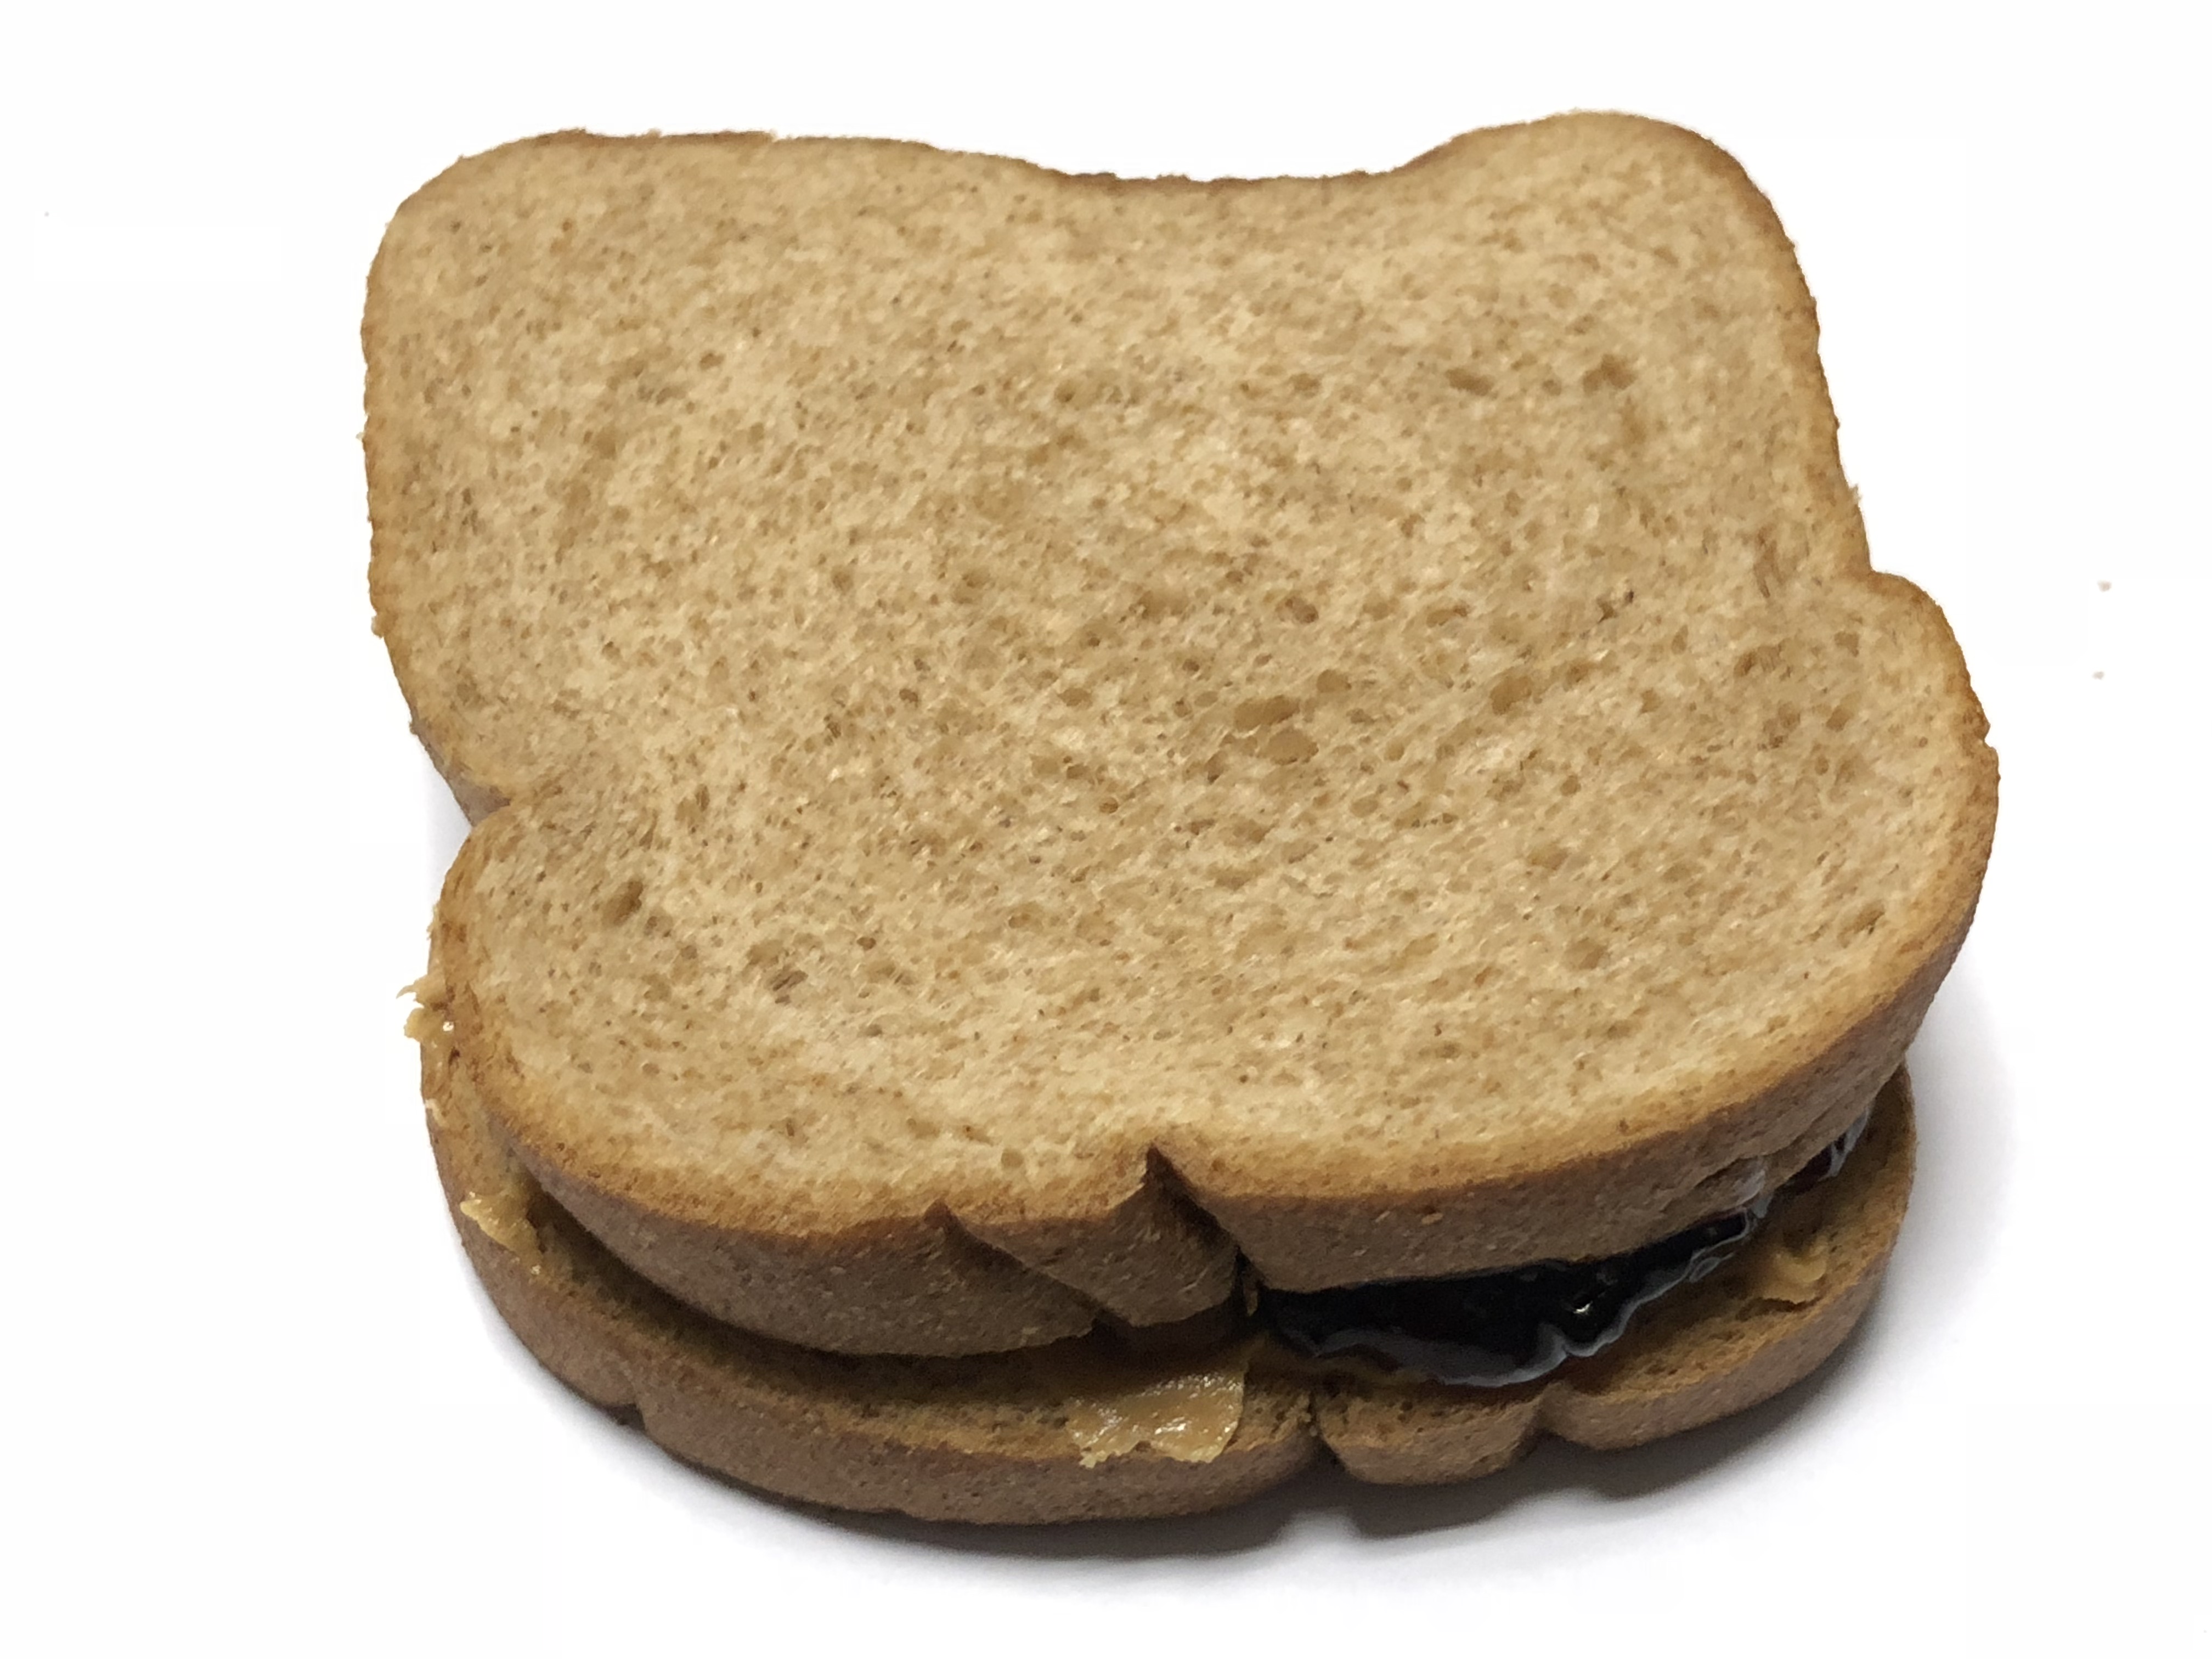 File 05 03 21 25 15 A Peanut Butter And Jelly Sandwich Composed Of Giant